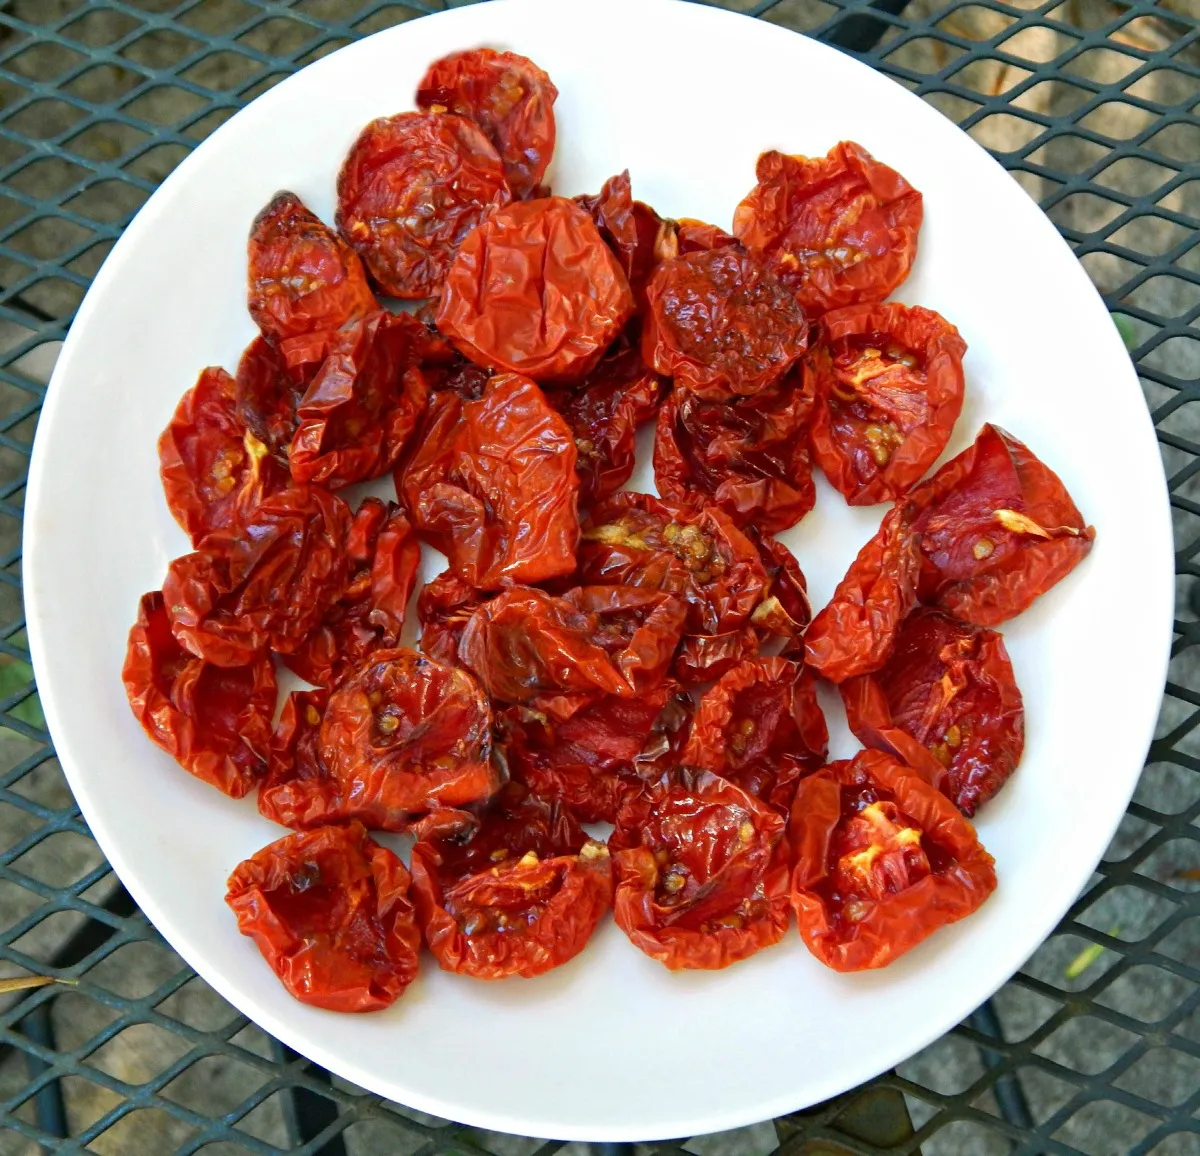 How To Store Oven Dried Tomatoes